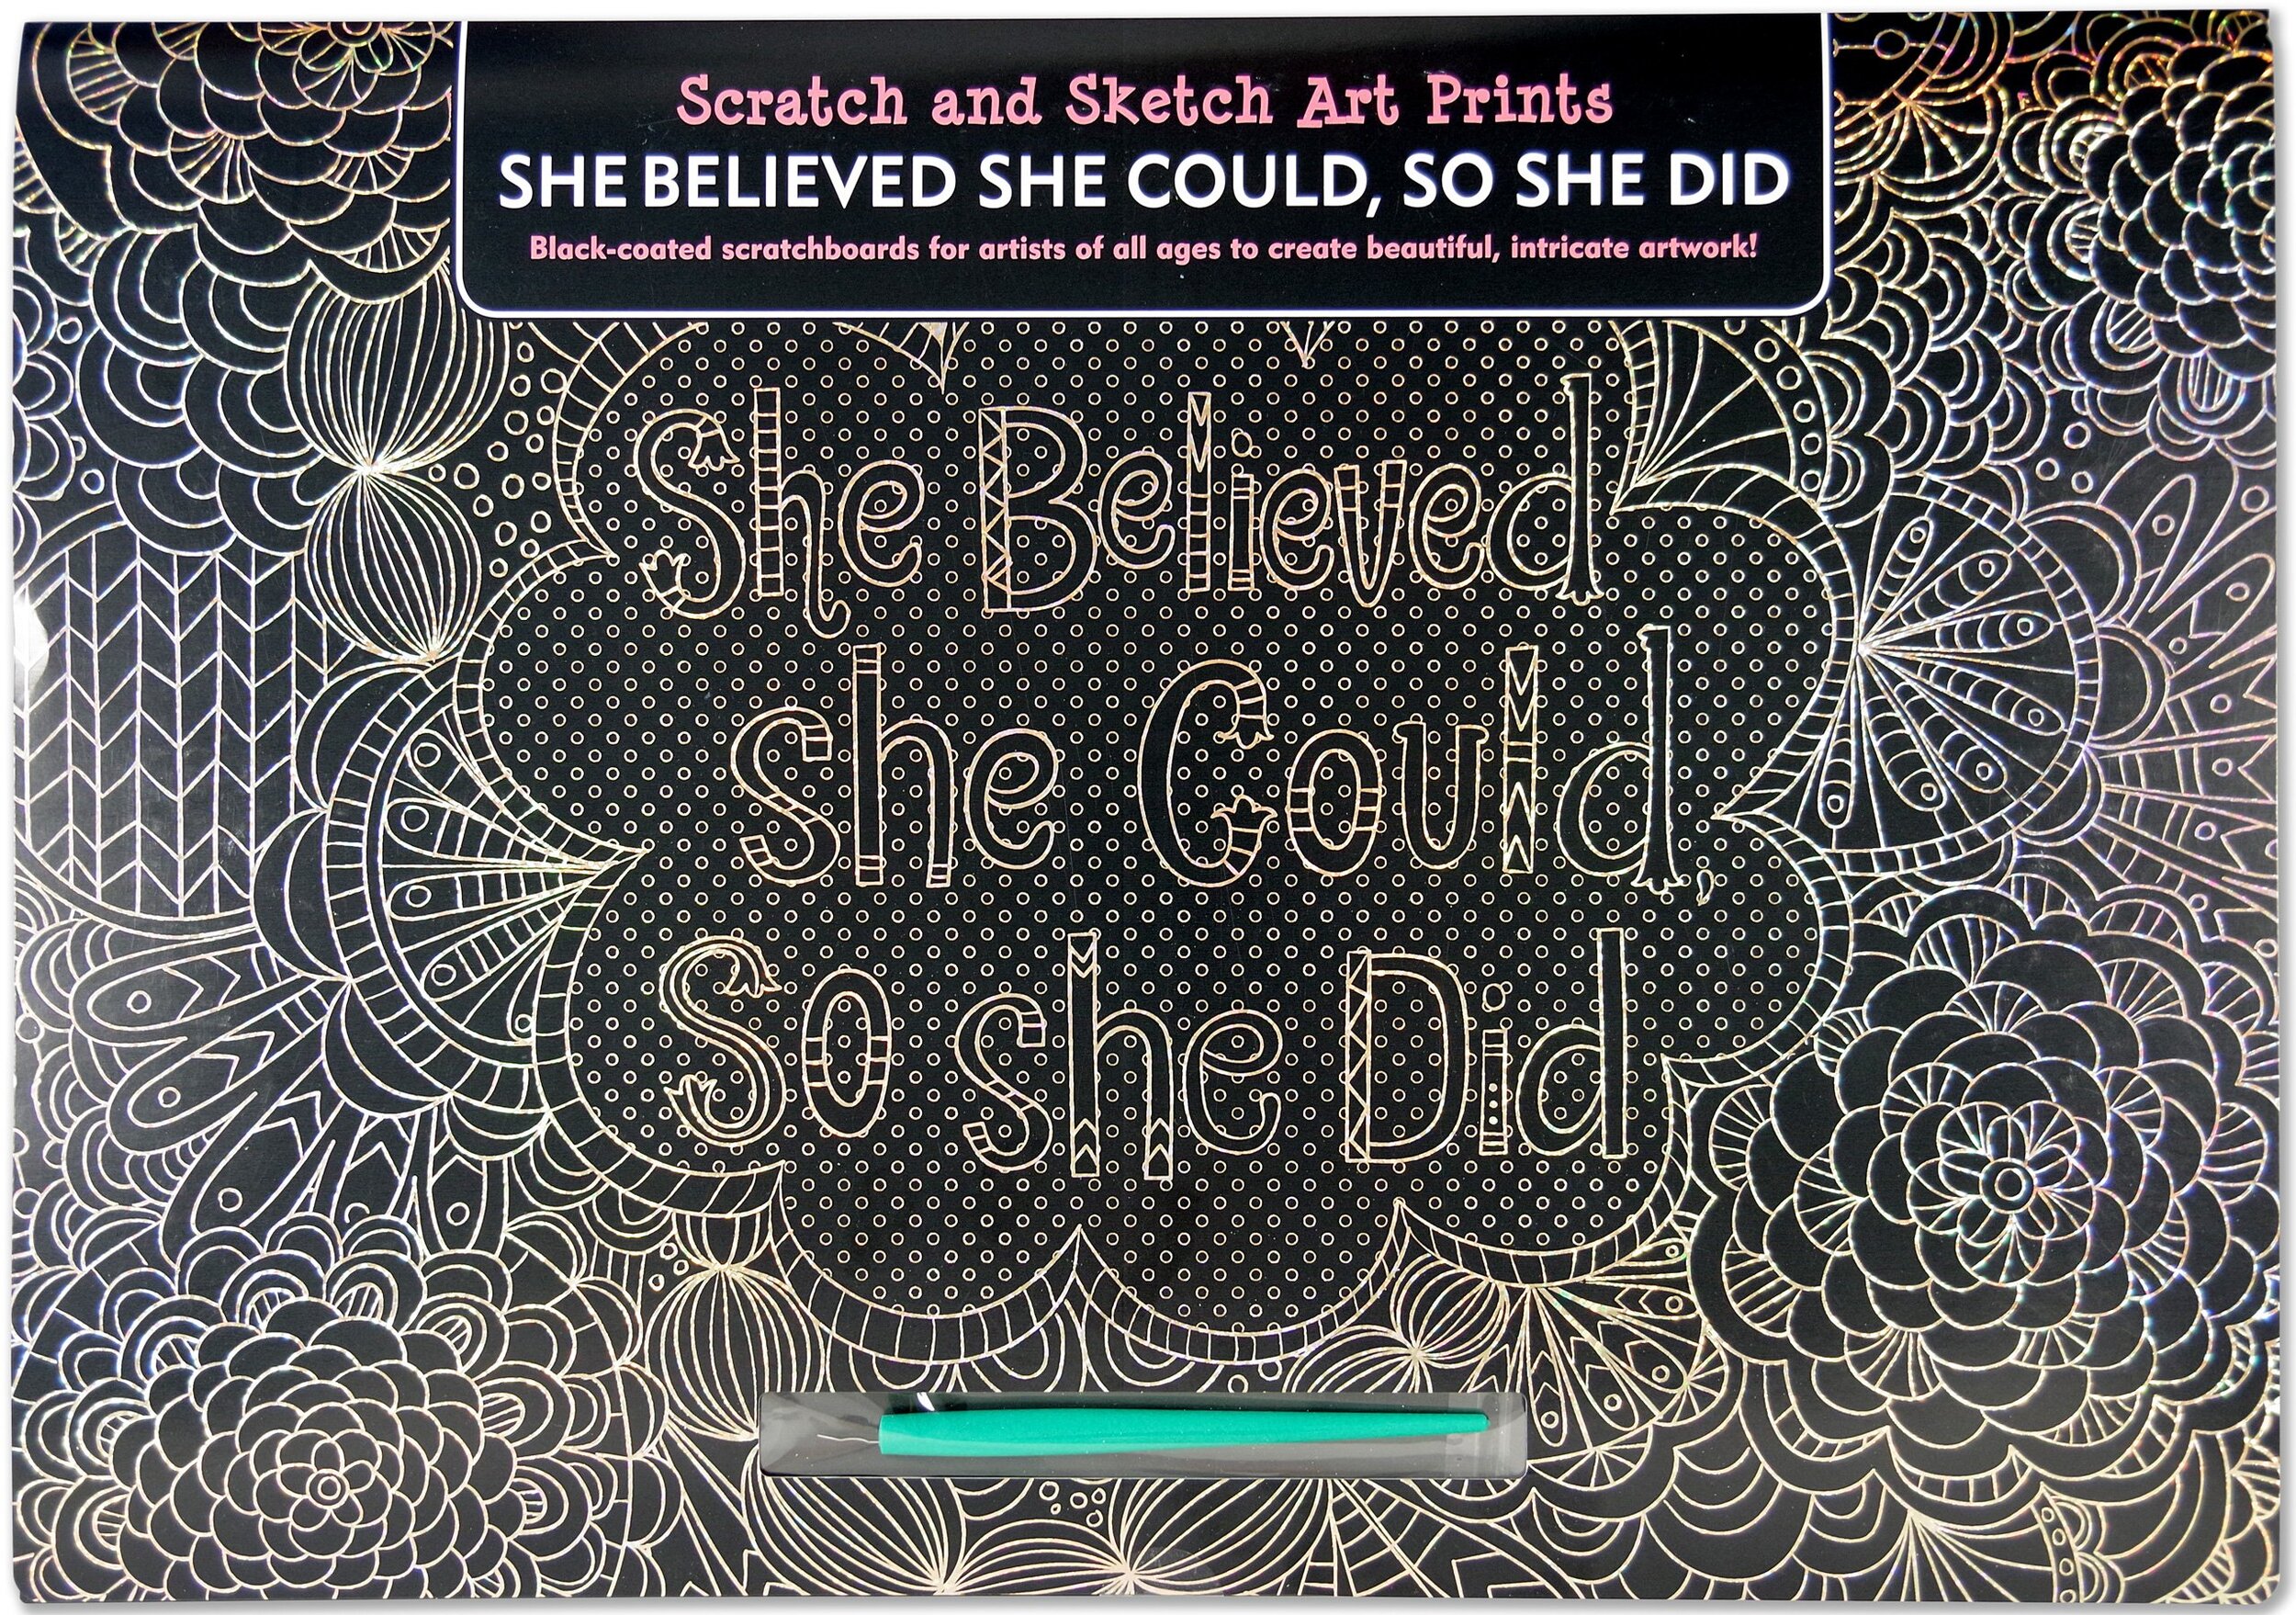 She Believed She Could, So She Did - Scratch &amp; Sketch Art Print 